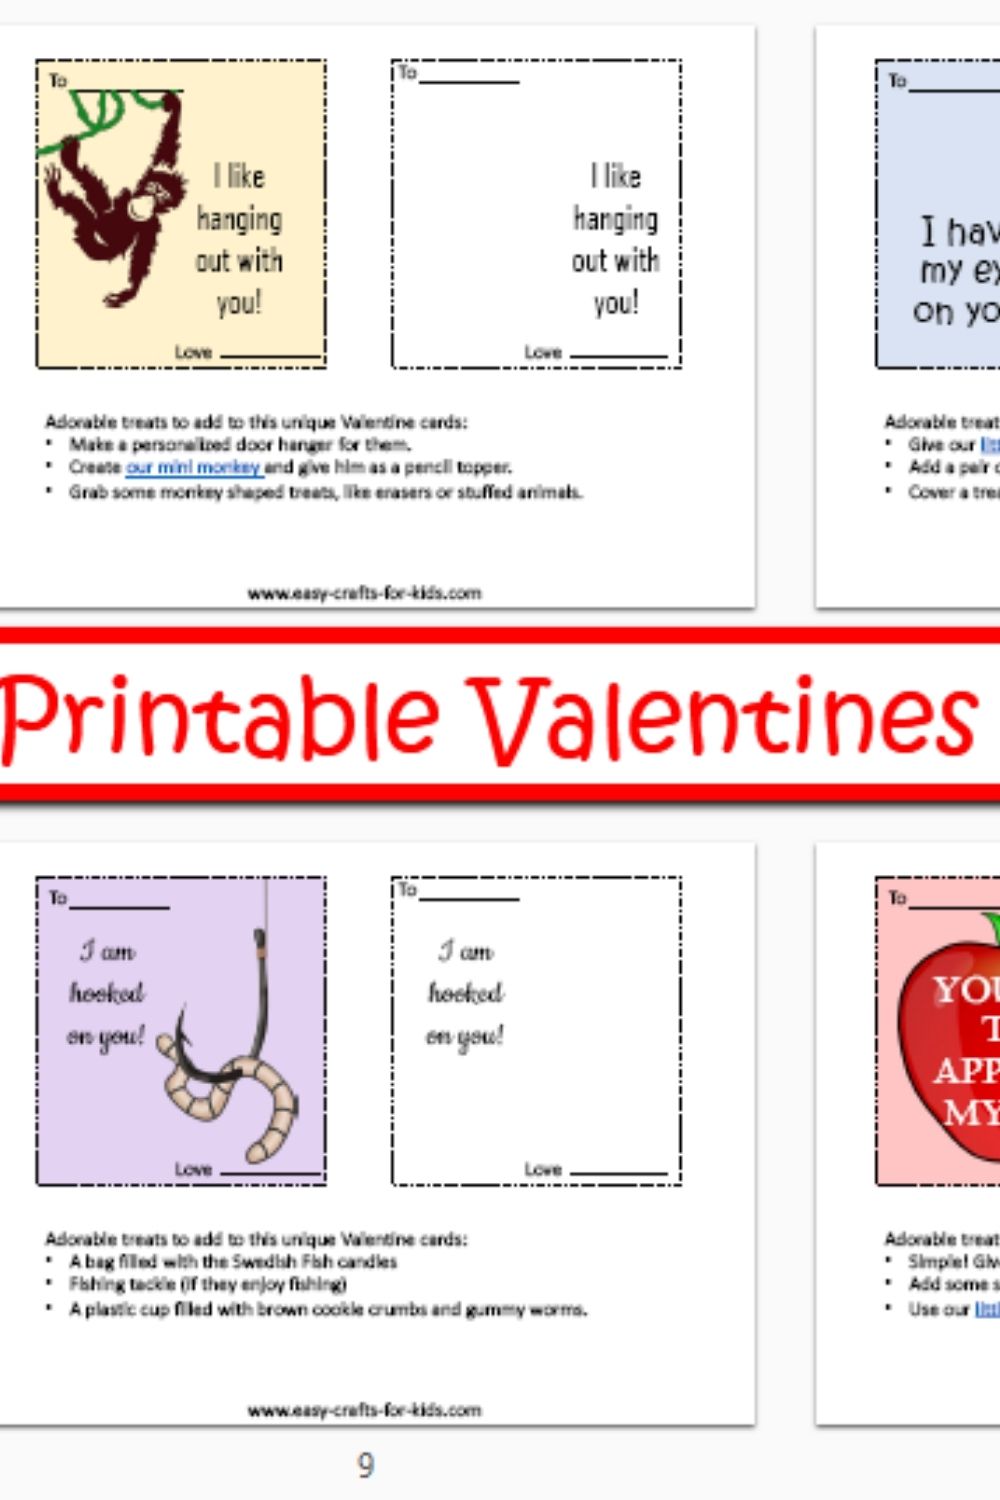 Printable Valentines Day Cards for Kids